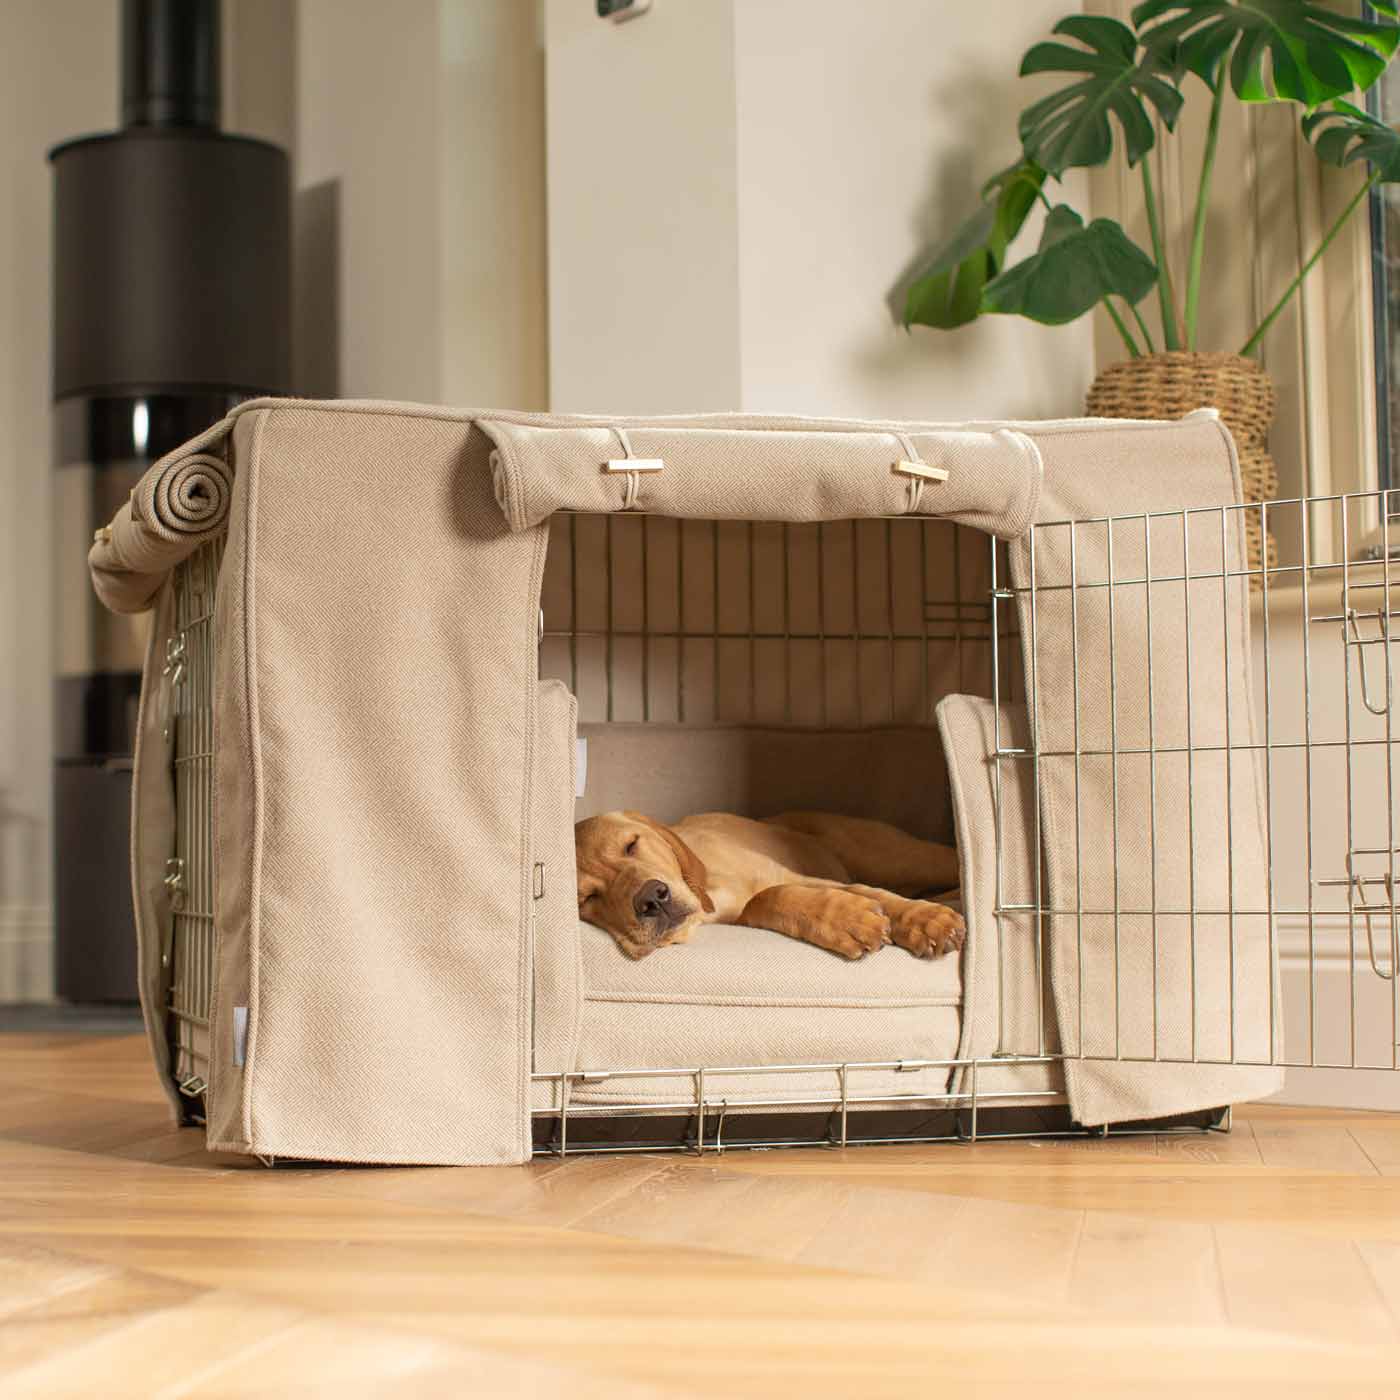 Luxury Heavy Duty Dog Crate, In Stunning Natural Herringbone Tweed Crate Set, The Perfect Dog Crate Set For Building The Ultimate Pet Den! Dog Crate Cover Available To Personalise at Lords & Labradors